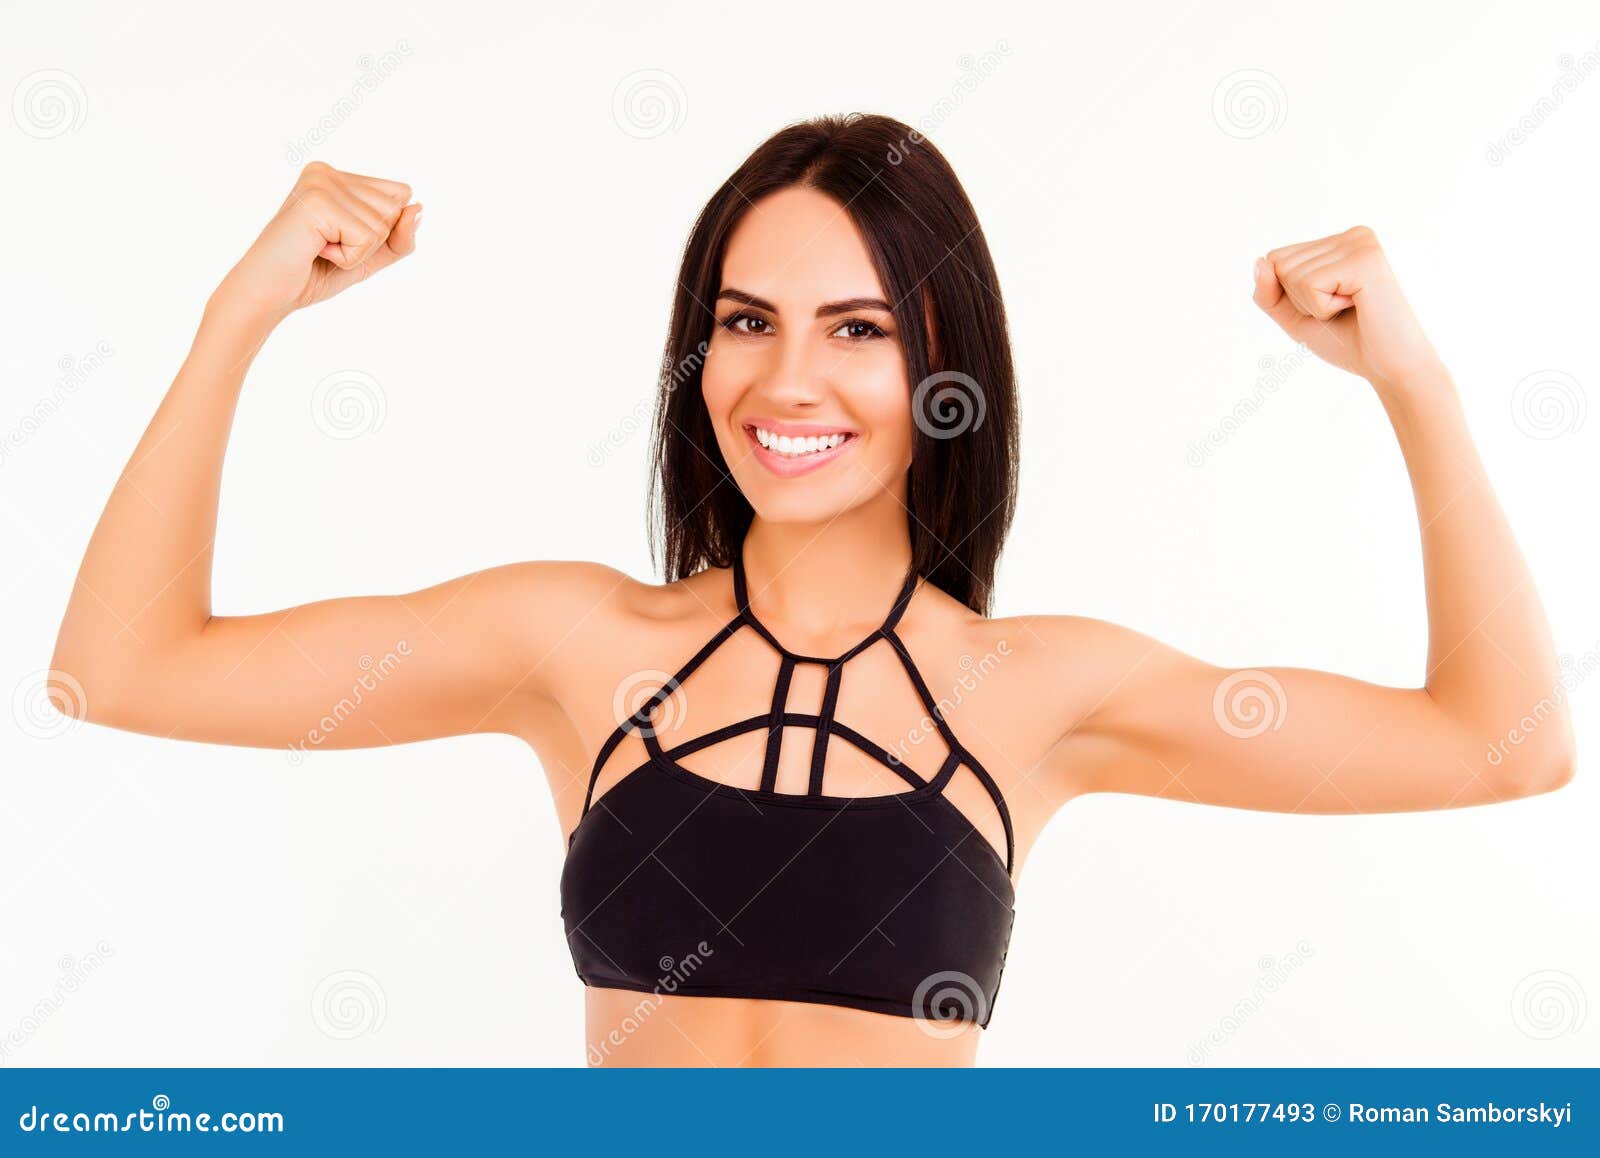 https://thumbs.dreamstime.com/z/healthy-fit-young-woman-demonstrating-her-strong-arms-170177493.jpg